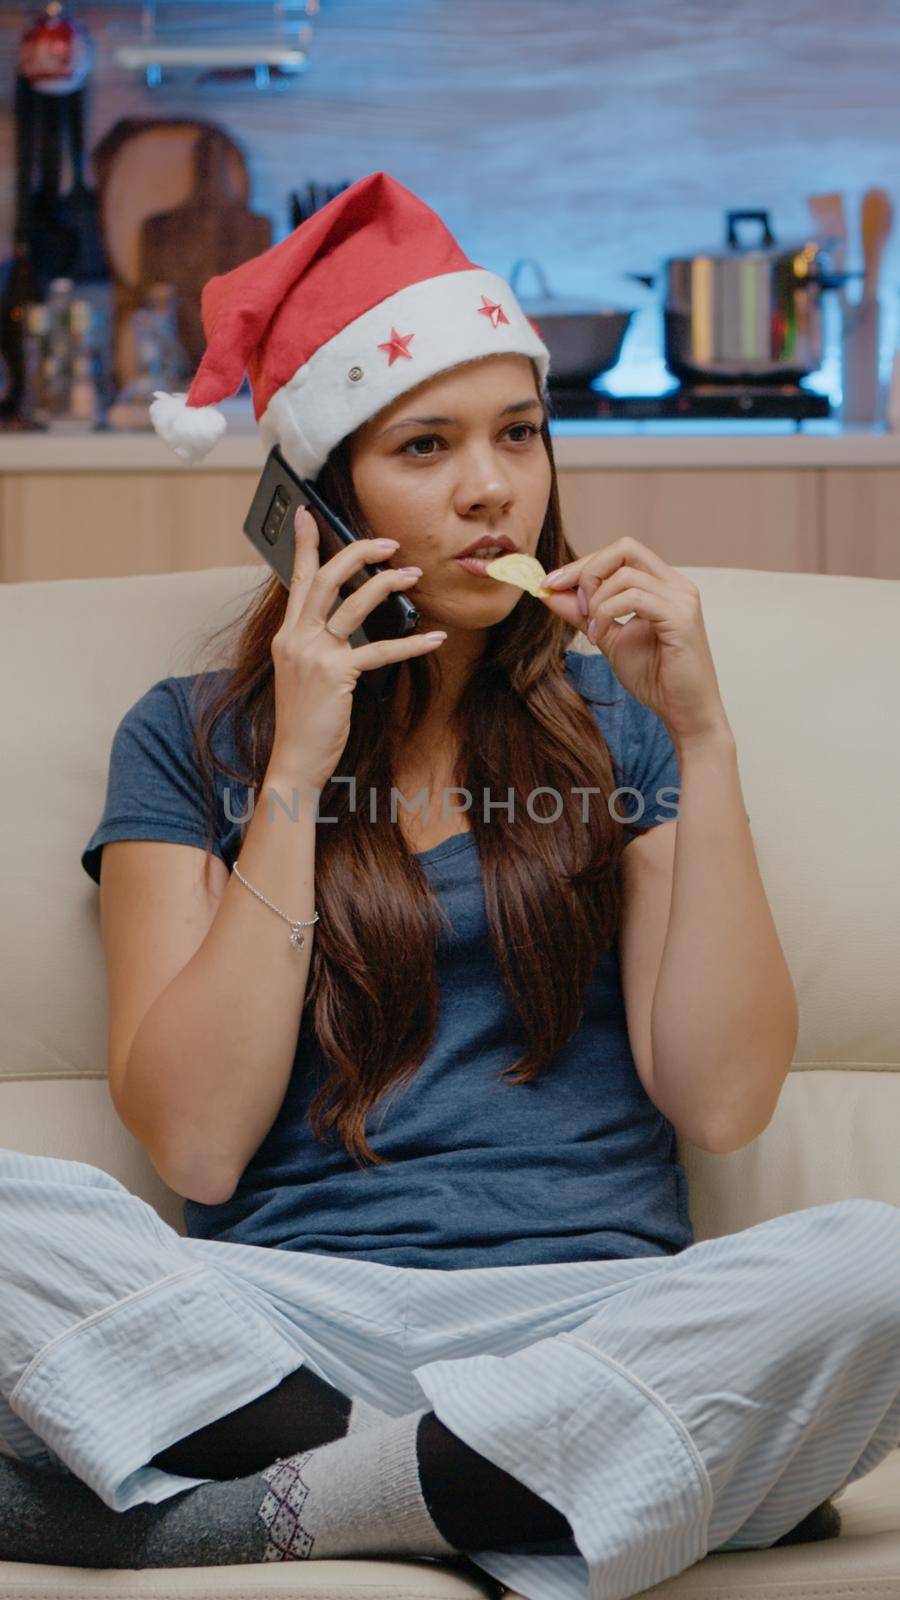 Festive woman talking on smartphone with family for remote christmas celebration. Adult with red santa hat using call on phone chatting while watching television and eating chips